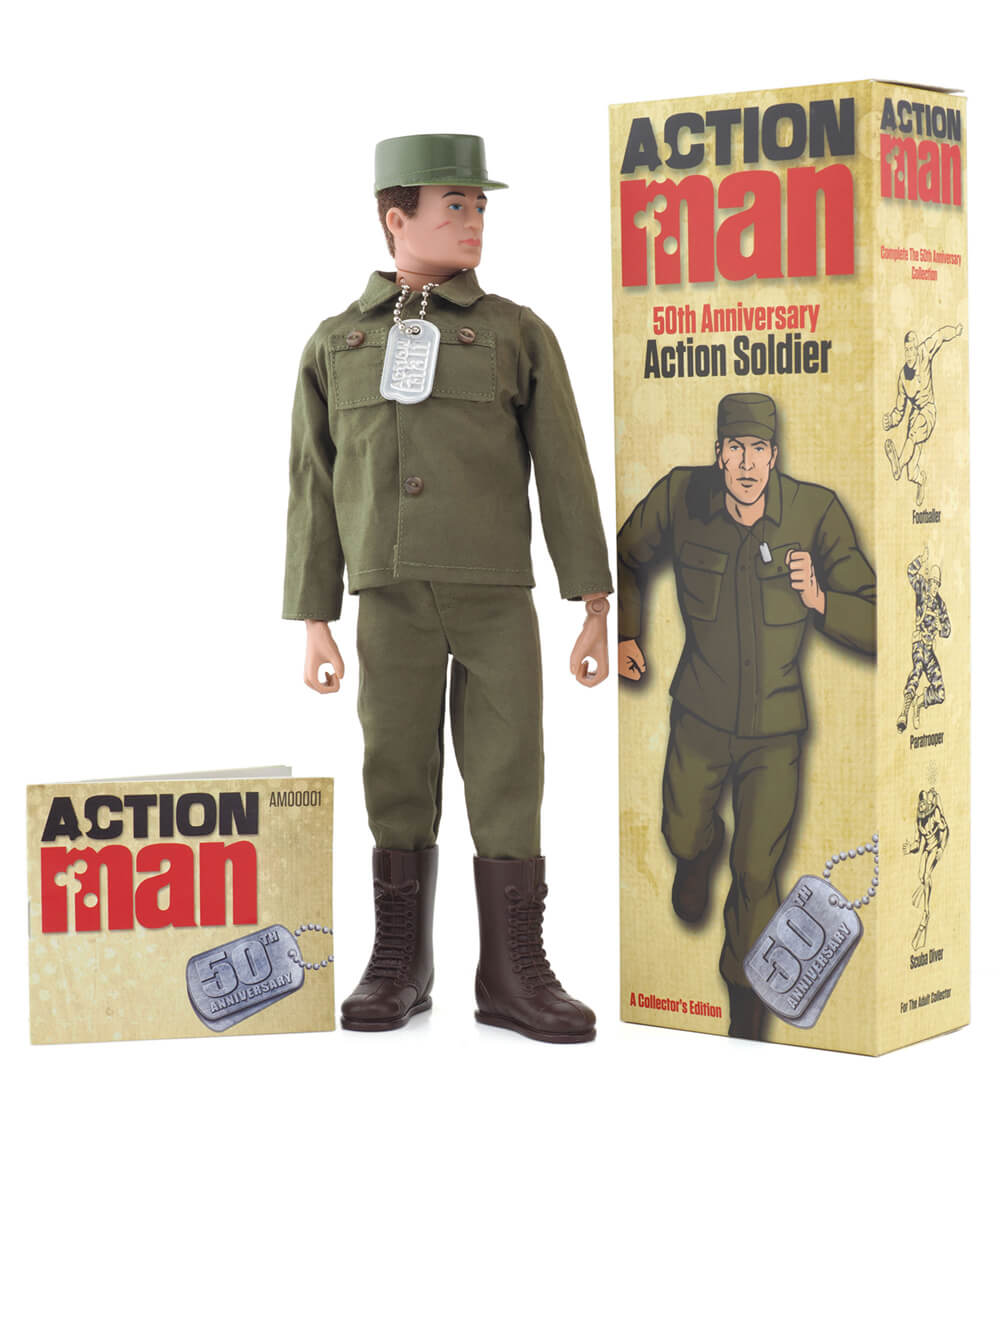 Action Man 50th Anniversary Action Soldier